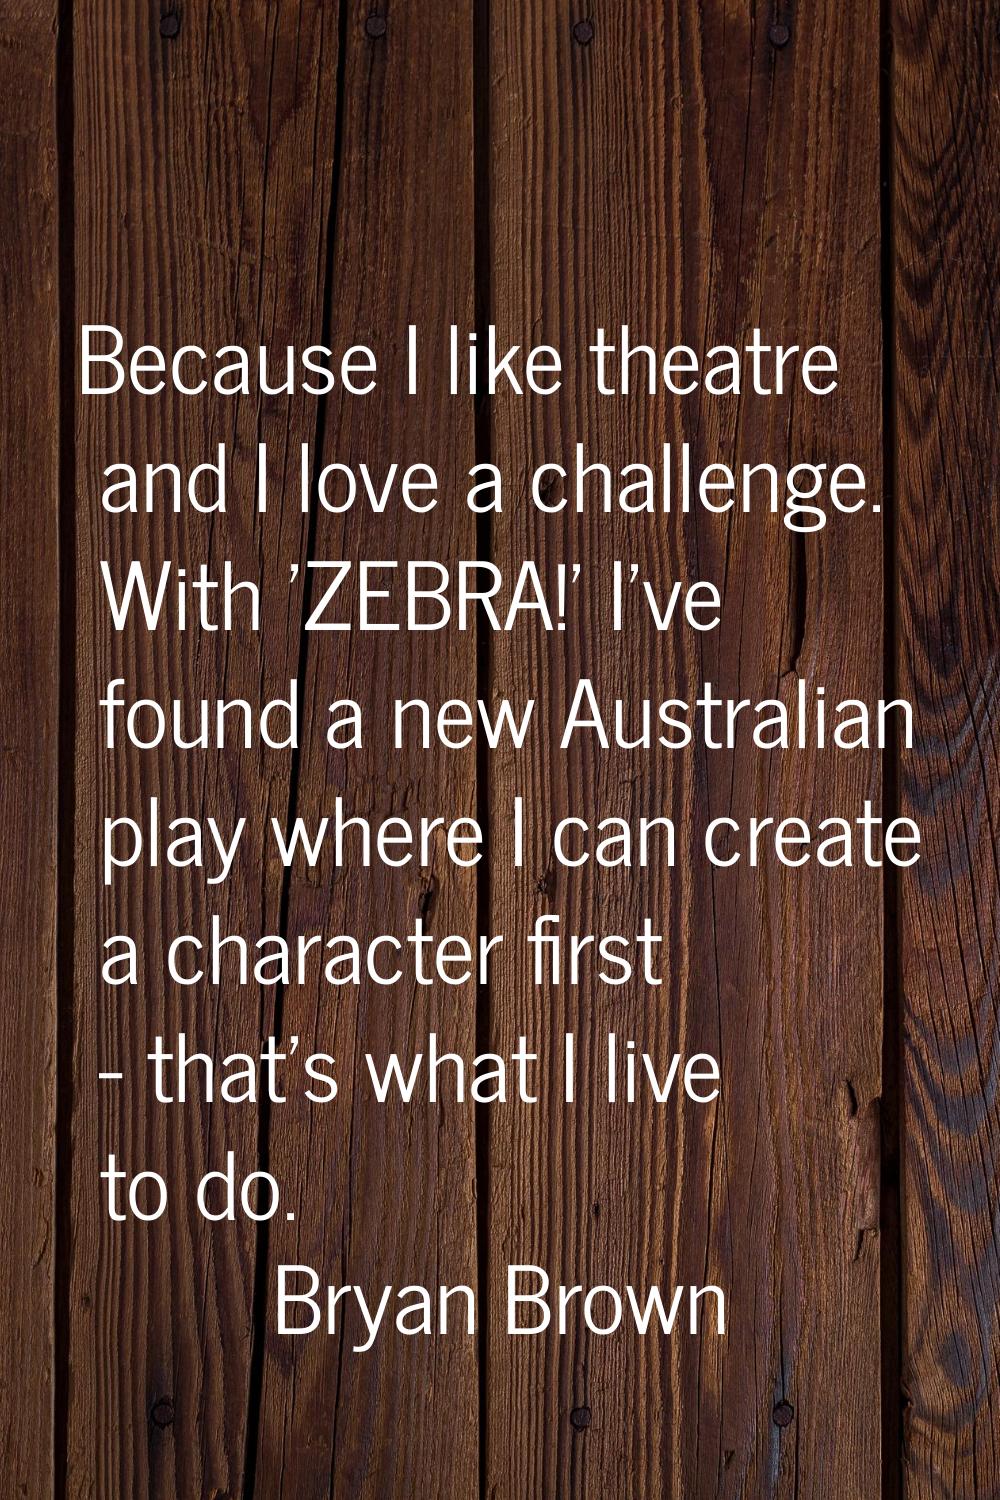 Because I like theatre and I love a challenge. With 'ZEBRA!' I've found a new Australian play where